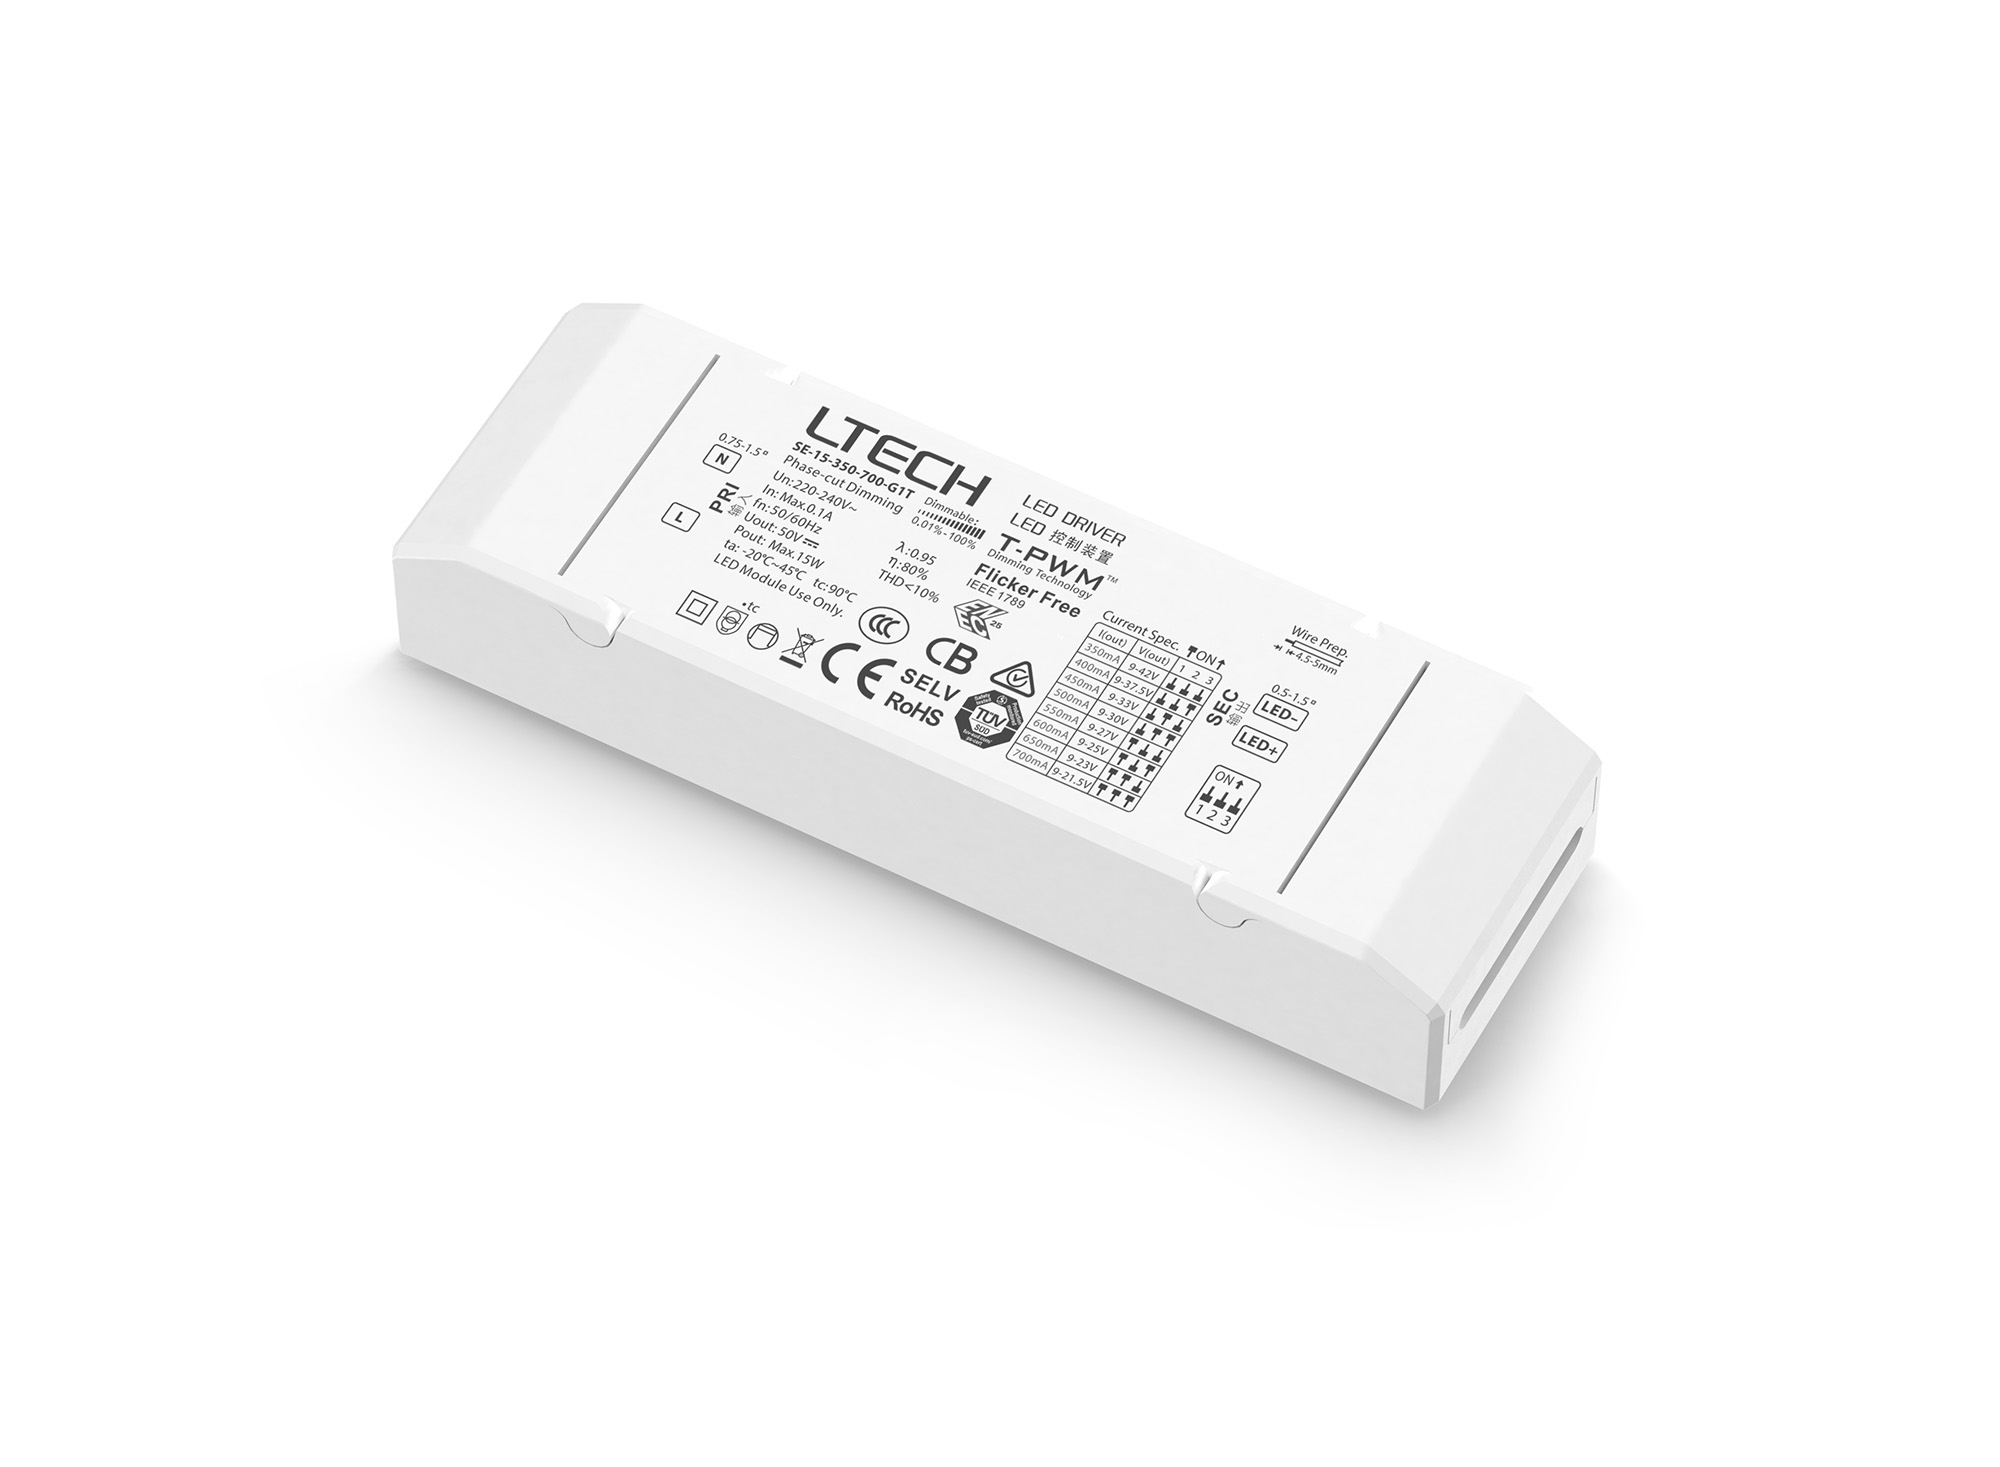 SE-15-350-700-G1T  Triac/ELV Push Dim PWM 15W Constant Current Dimmable Driver 45V 150-700mA, IP44.